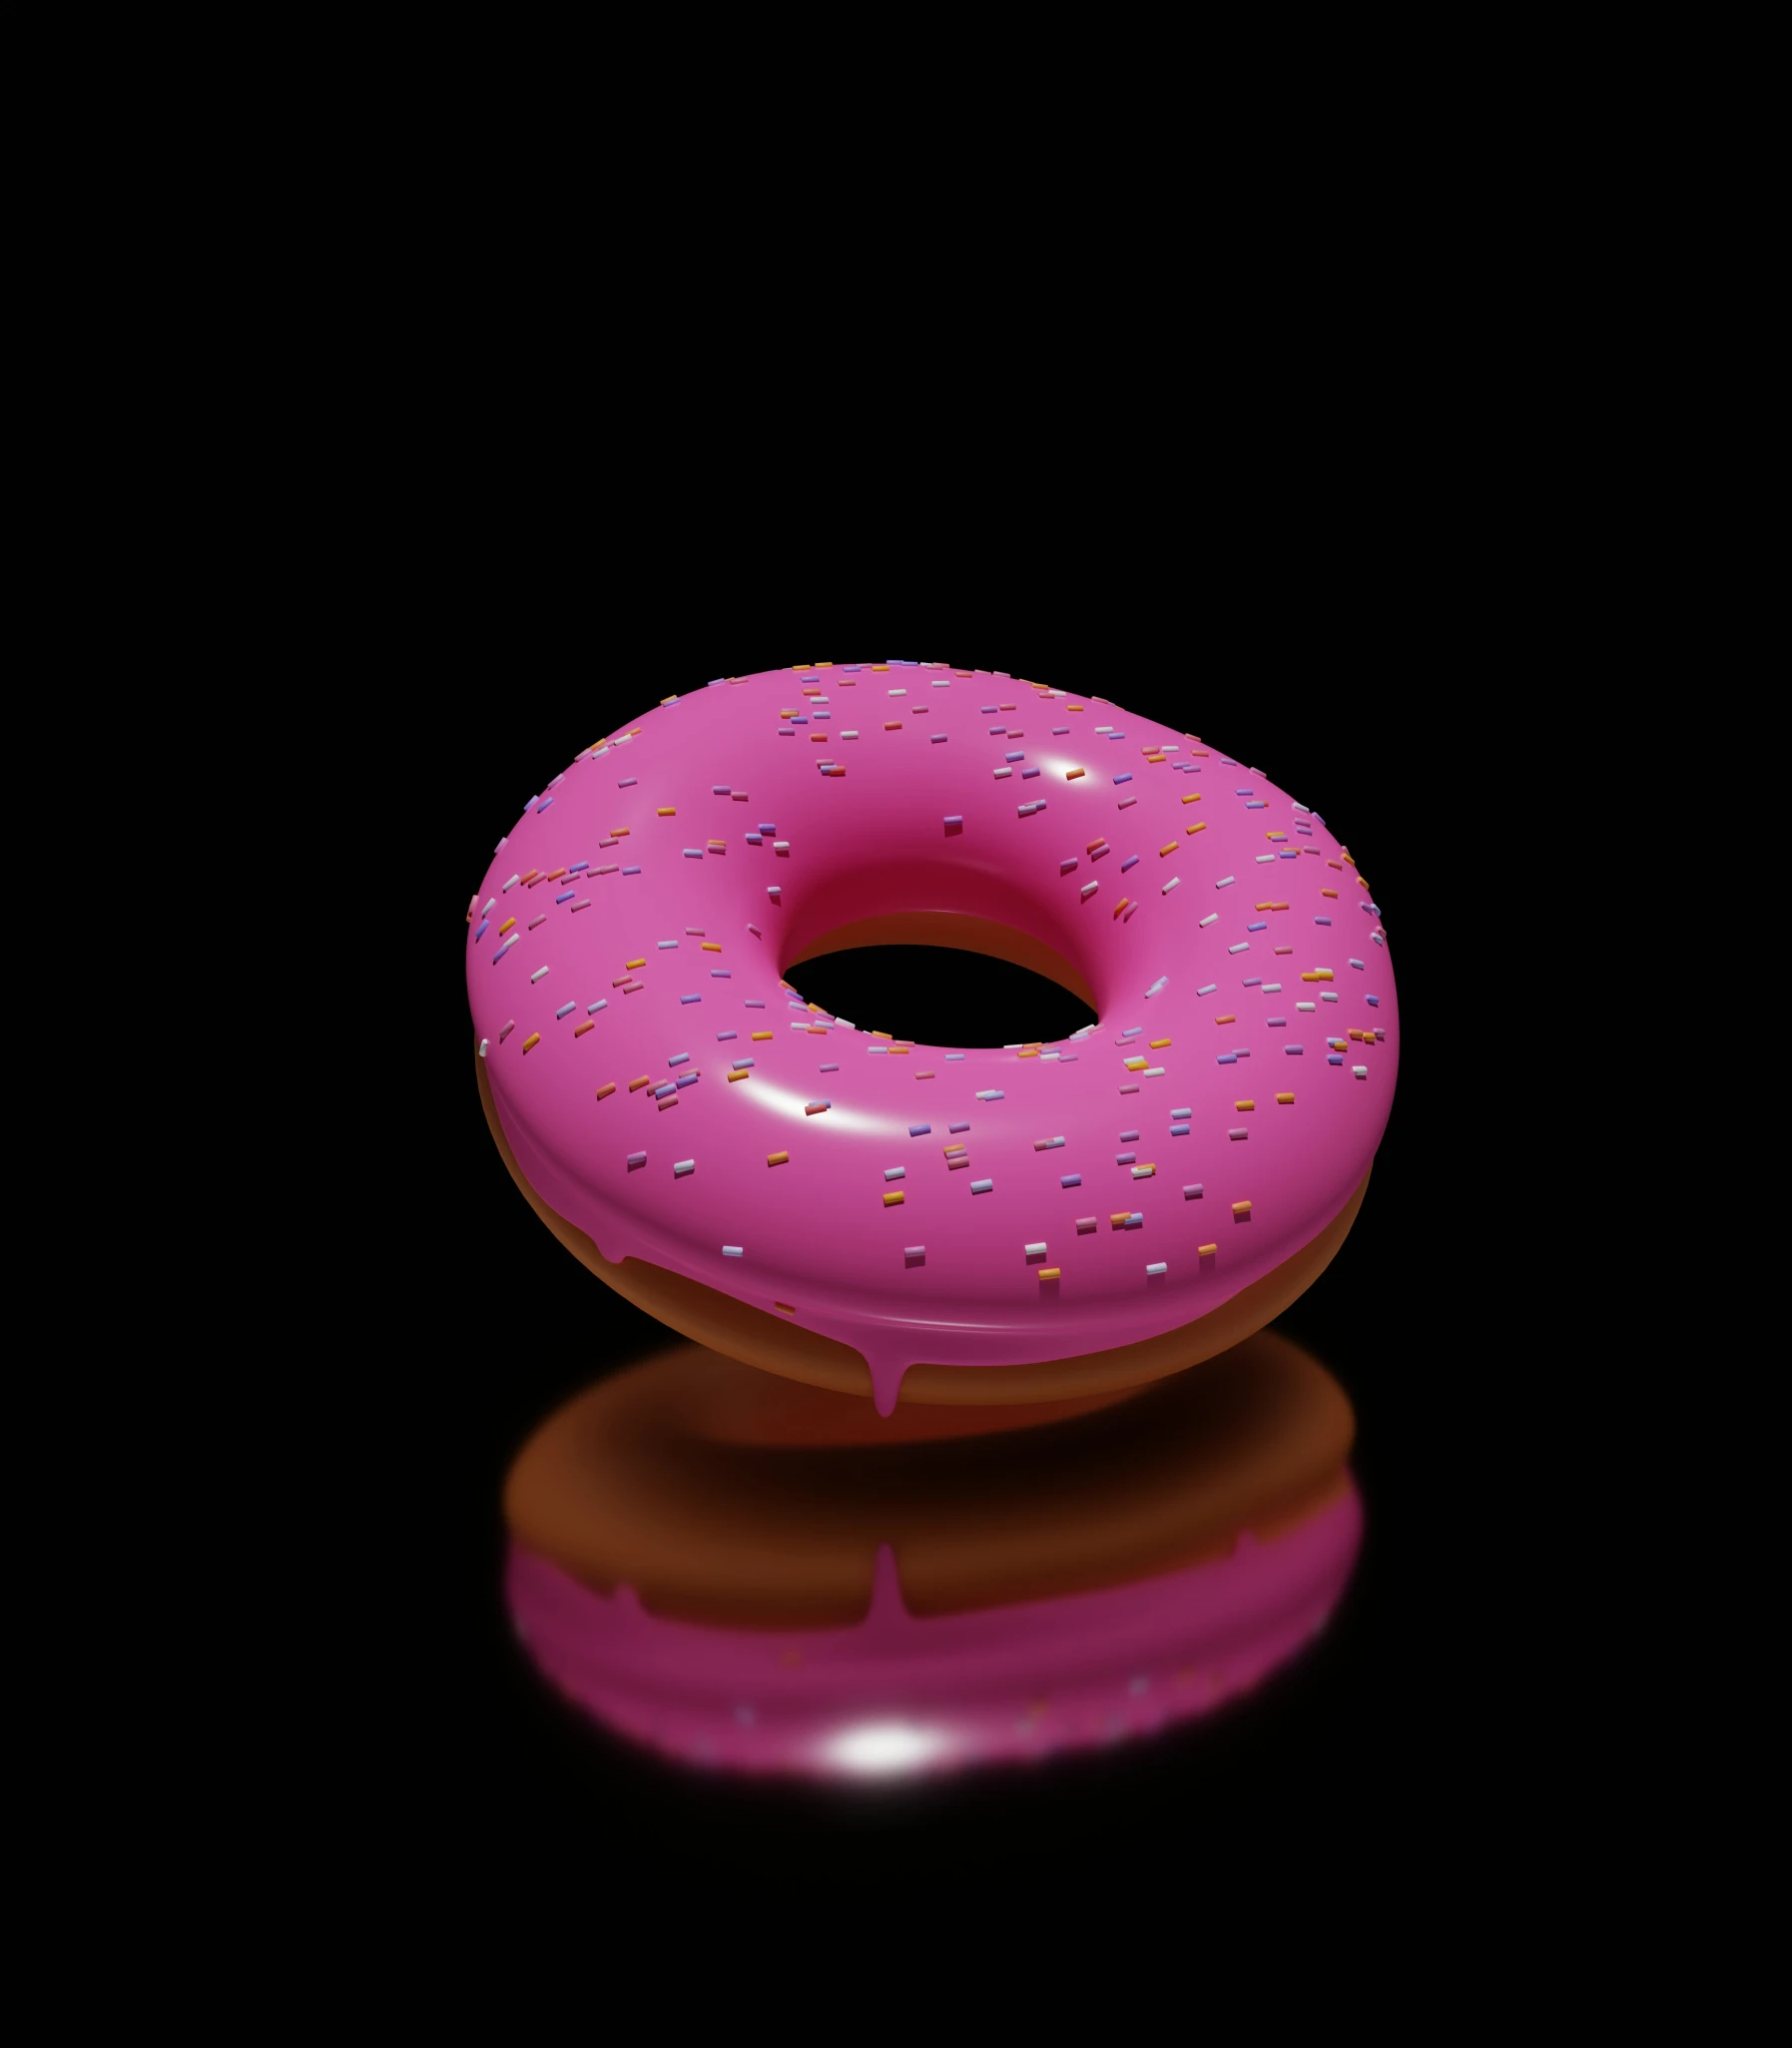 a pink doughnut with chocolate icing and sprinkles